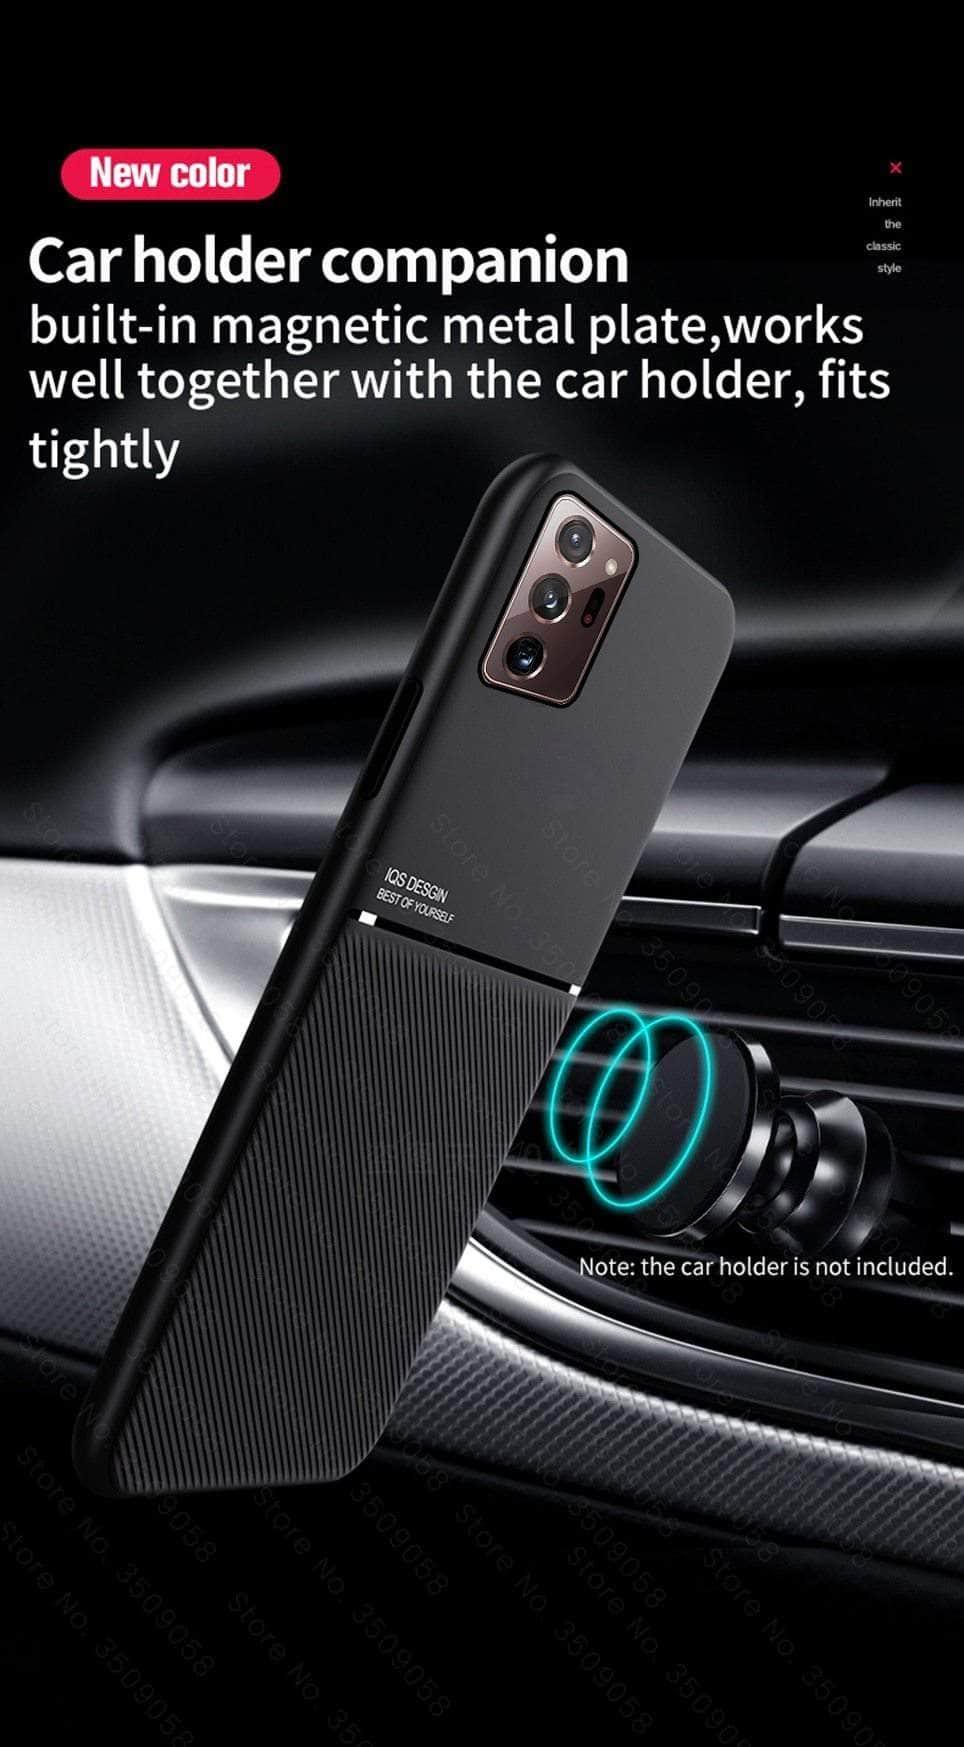 Note20 Ultra Silicone Car Magnetic Holder Back Cover - CaseBuddy